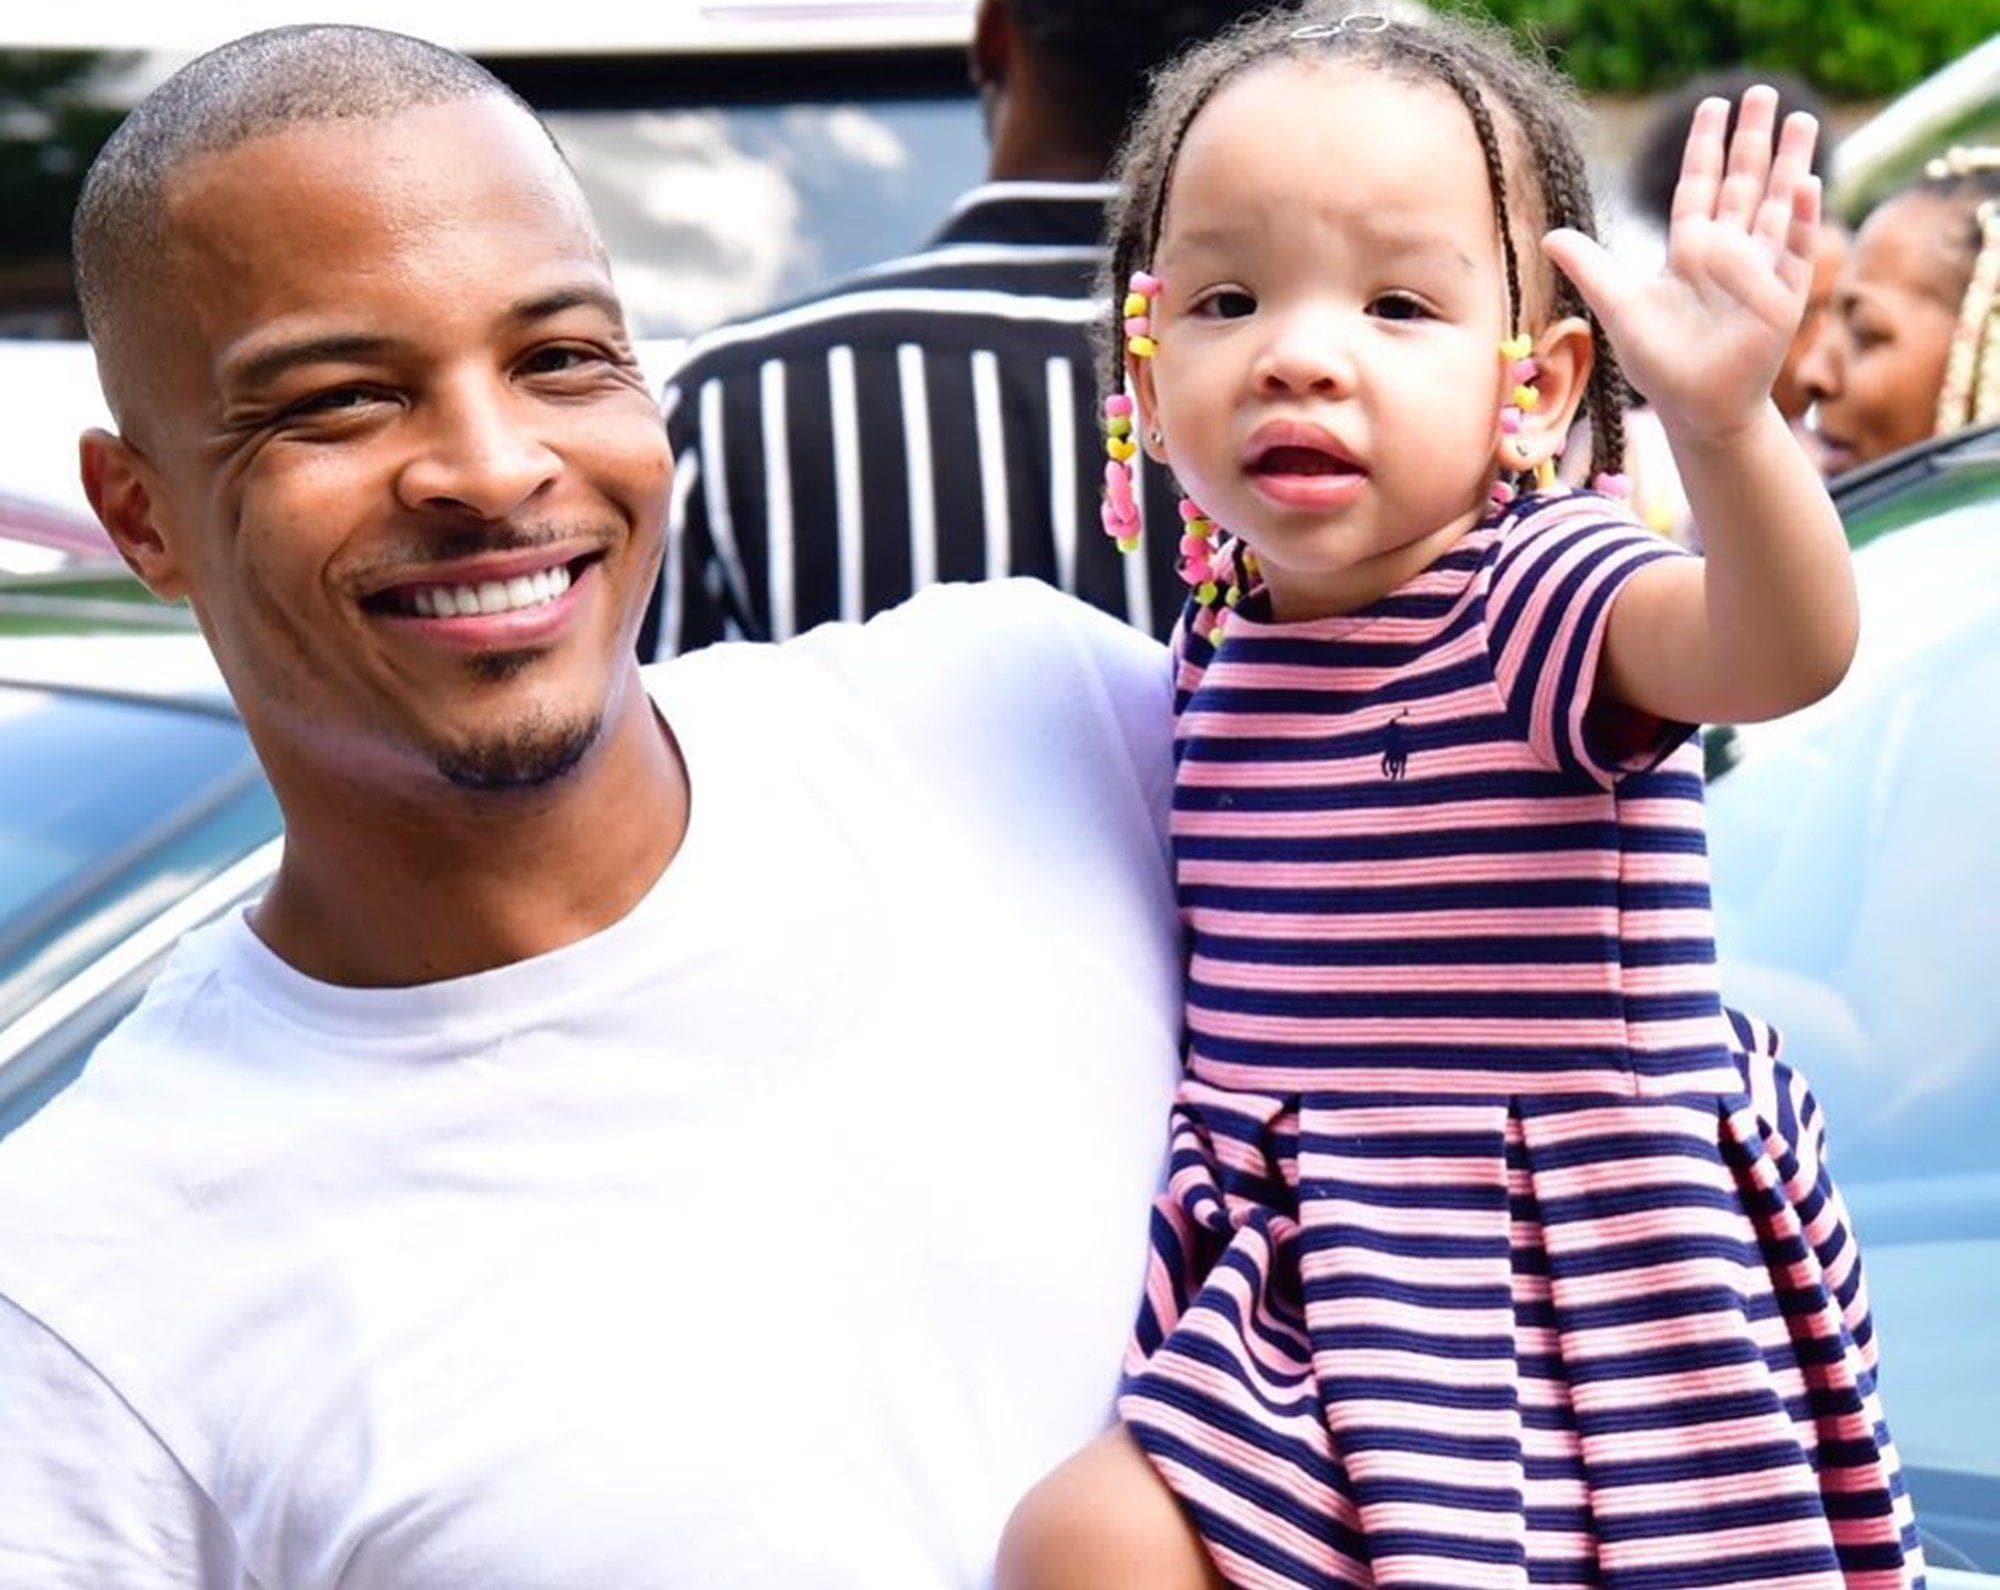 ”t-i-shares-the-sweetest-photo-of-his-baby-girl-heiress-harris-and-has-fans-in-awe”